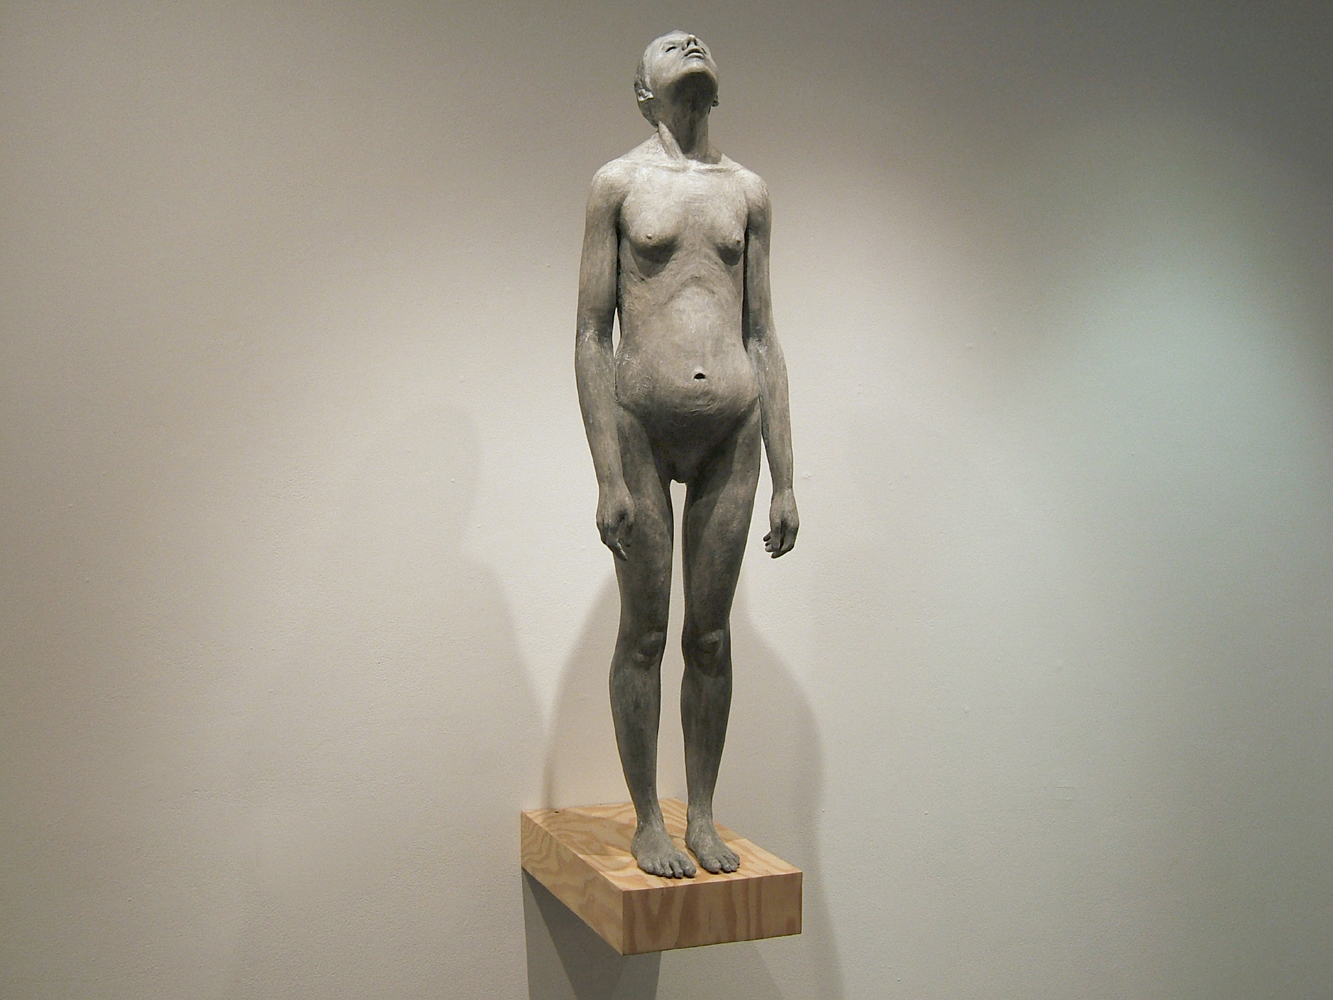   St. Lucy, 40 x 10 x 16 inches, Plaster, Wood - 2006       